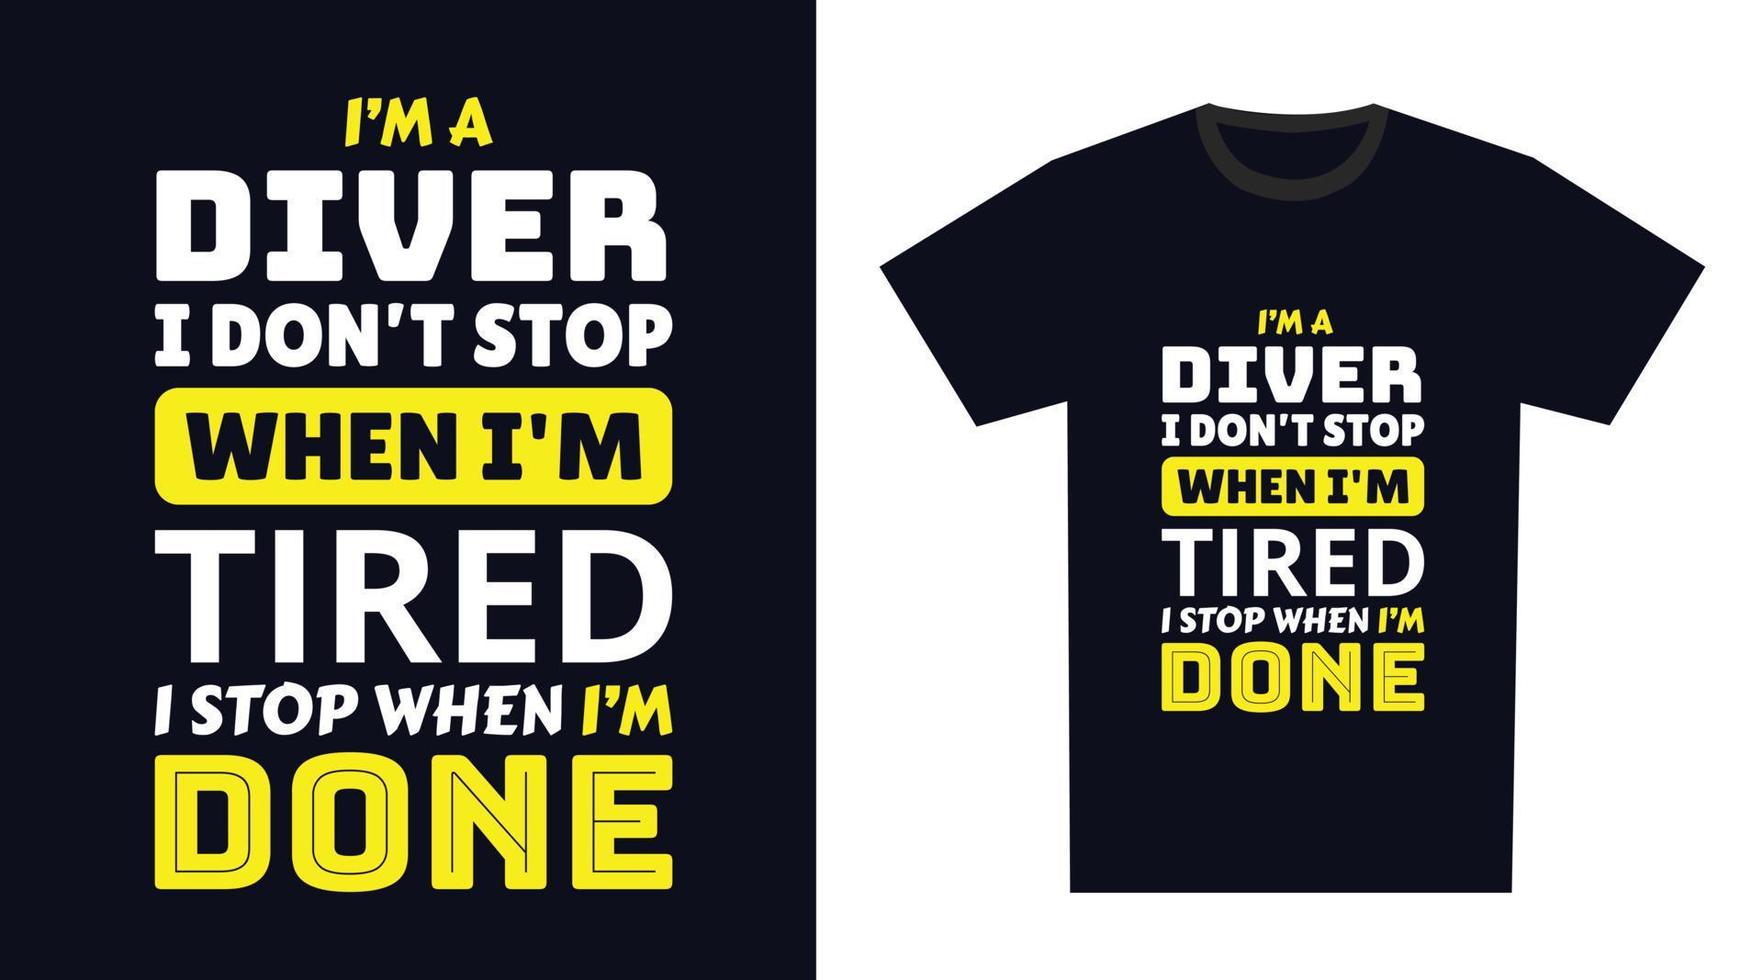 Diver T Shirt Design. I 'm a Diver I Don't Stop When I'm Tired, I Stop When I'm Done vector